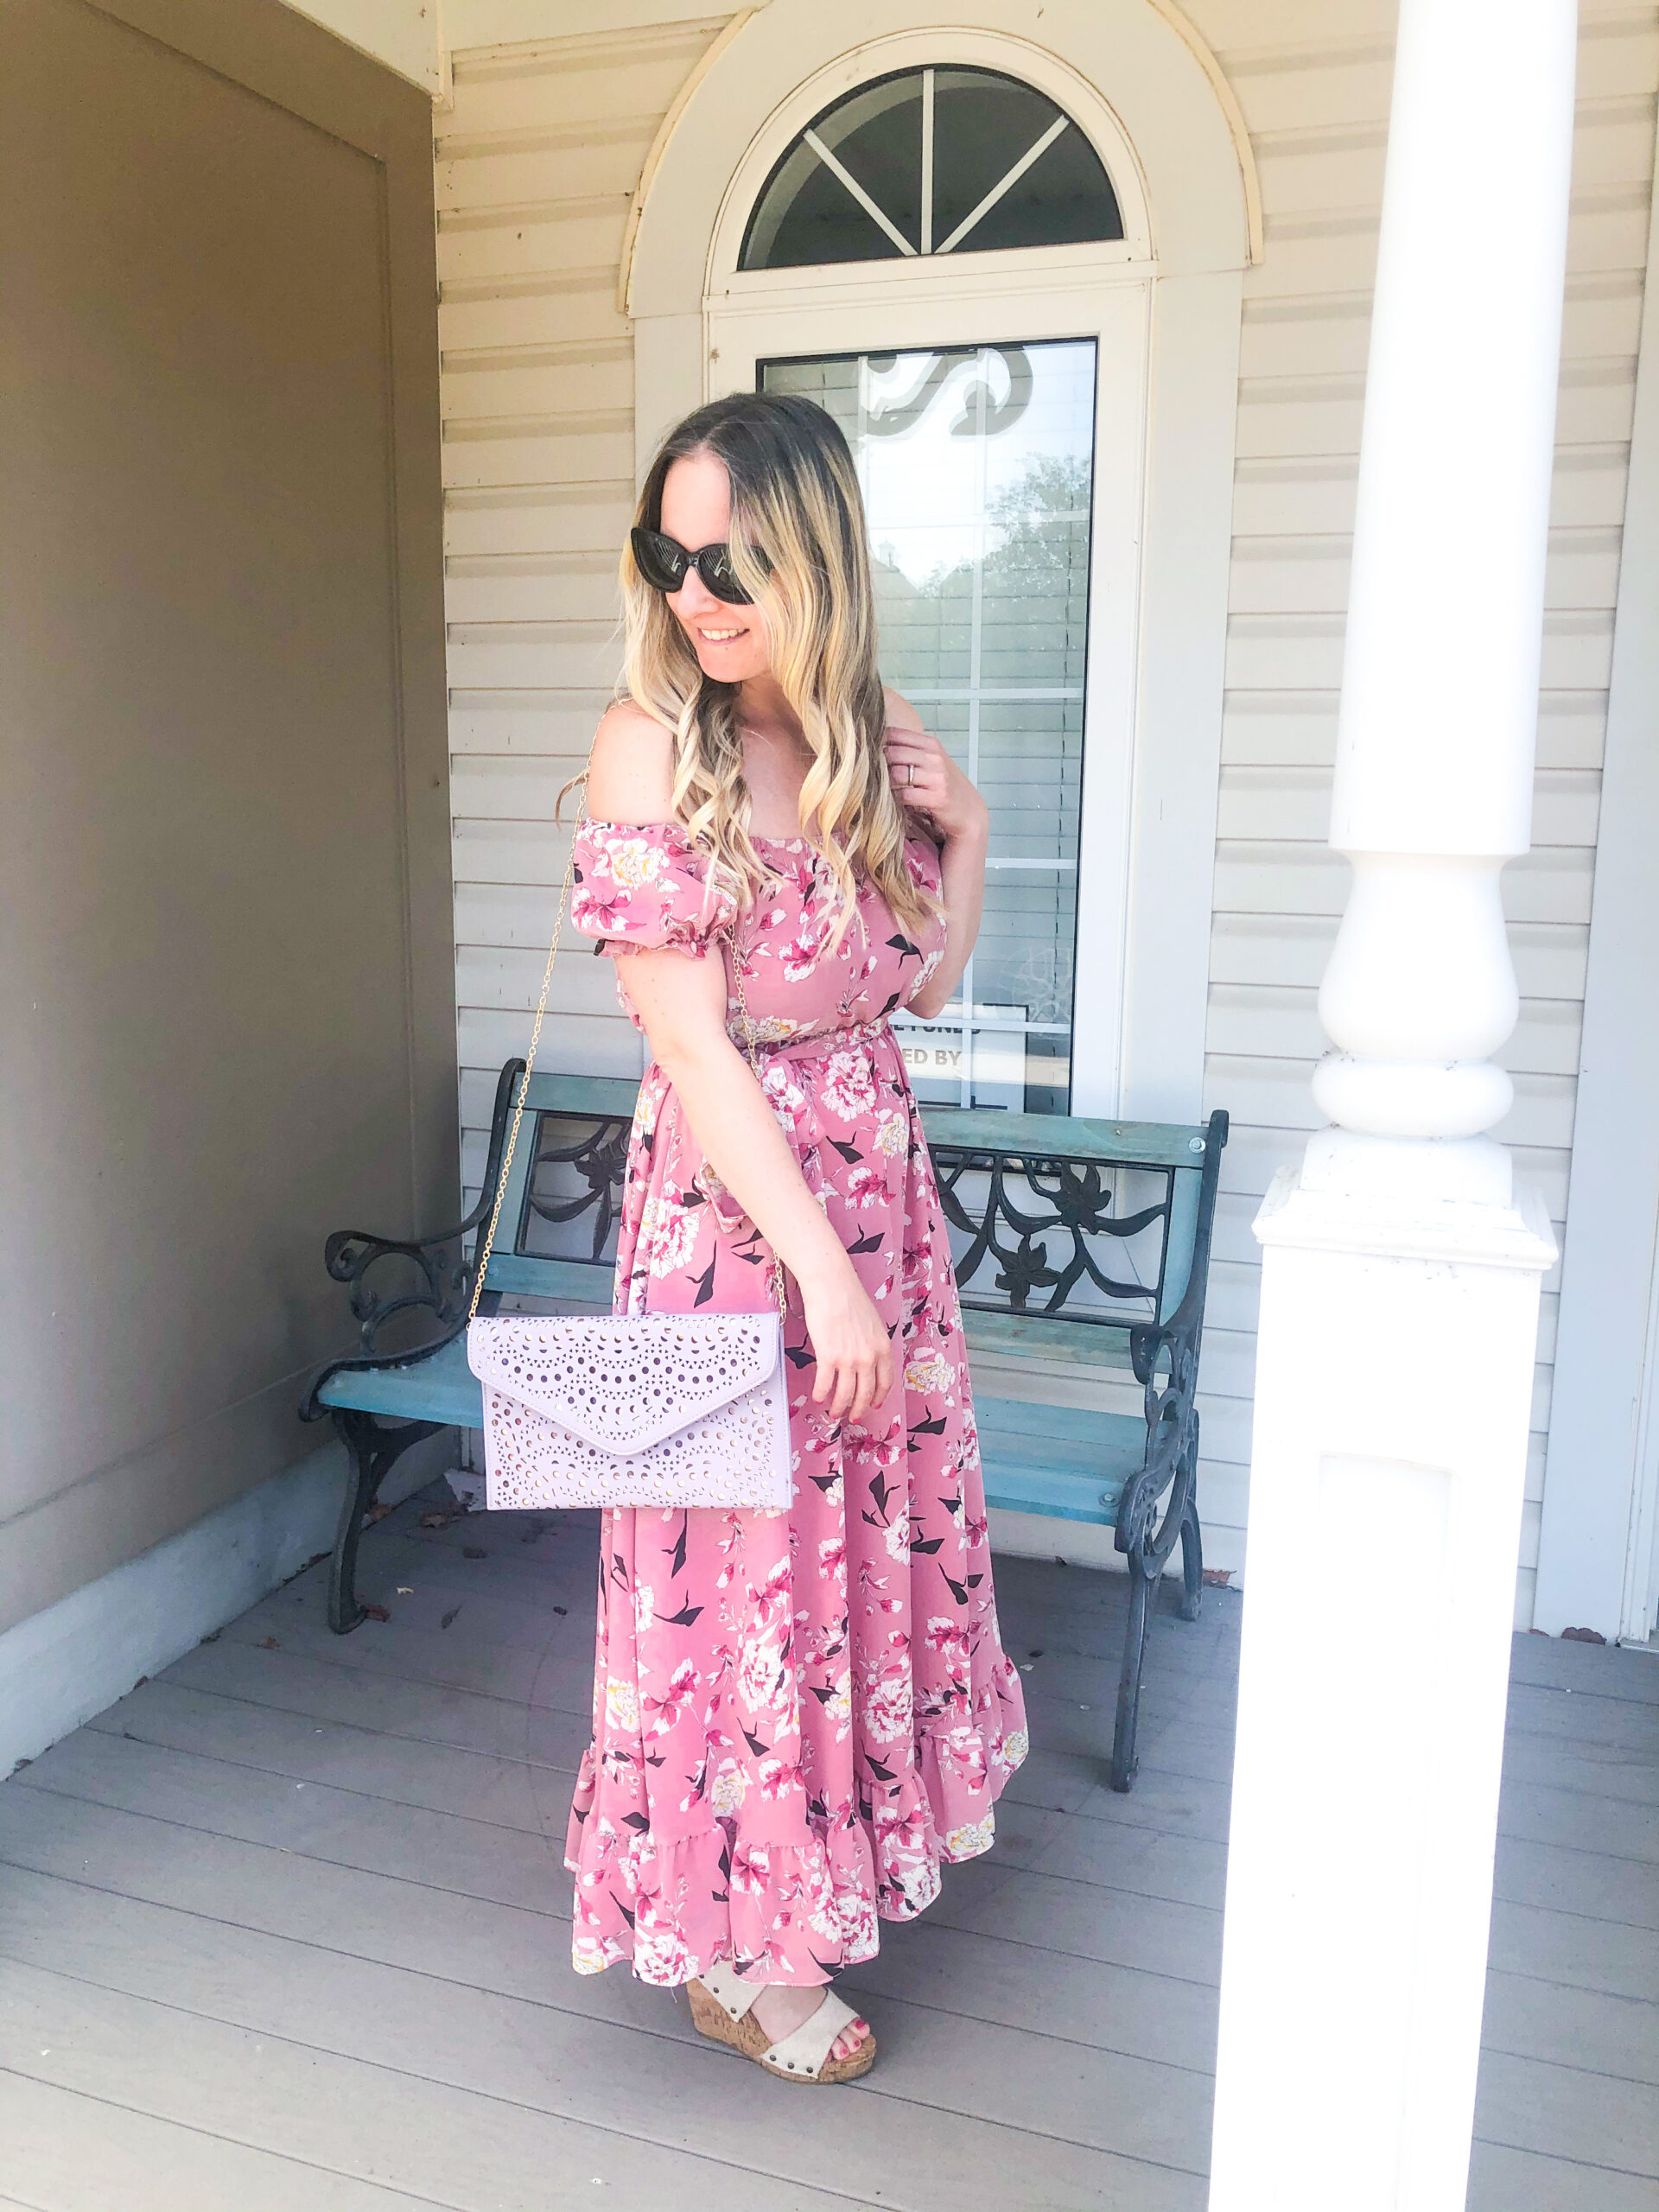 Shein pink floral off the shoulder dress on Livin' Life with Style 